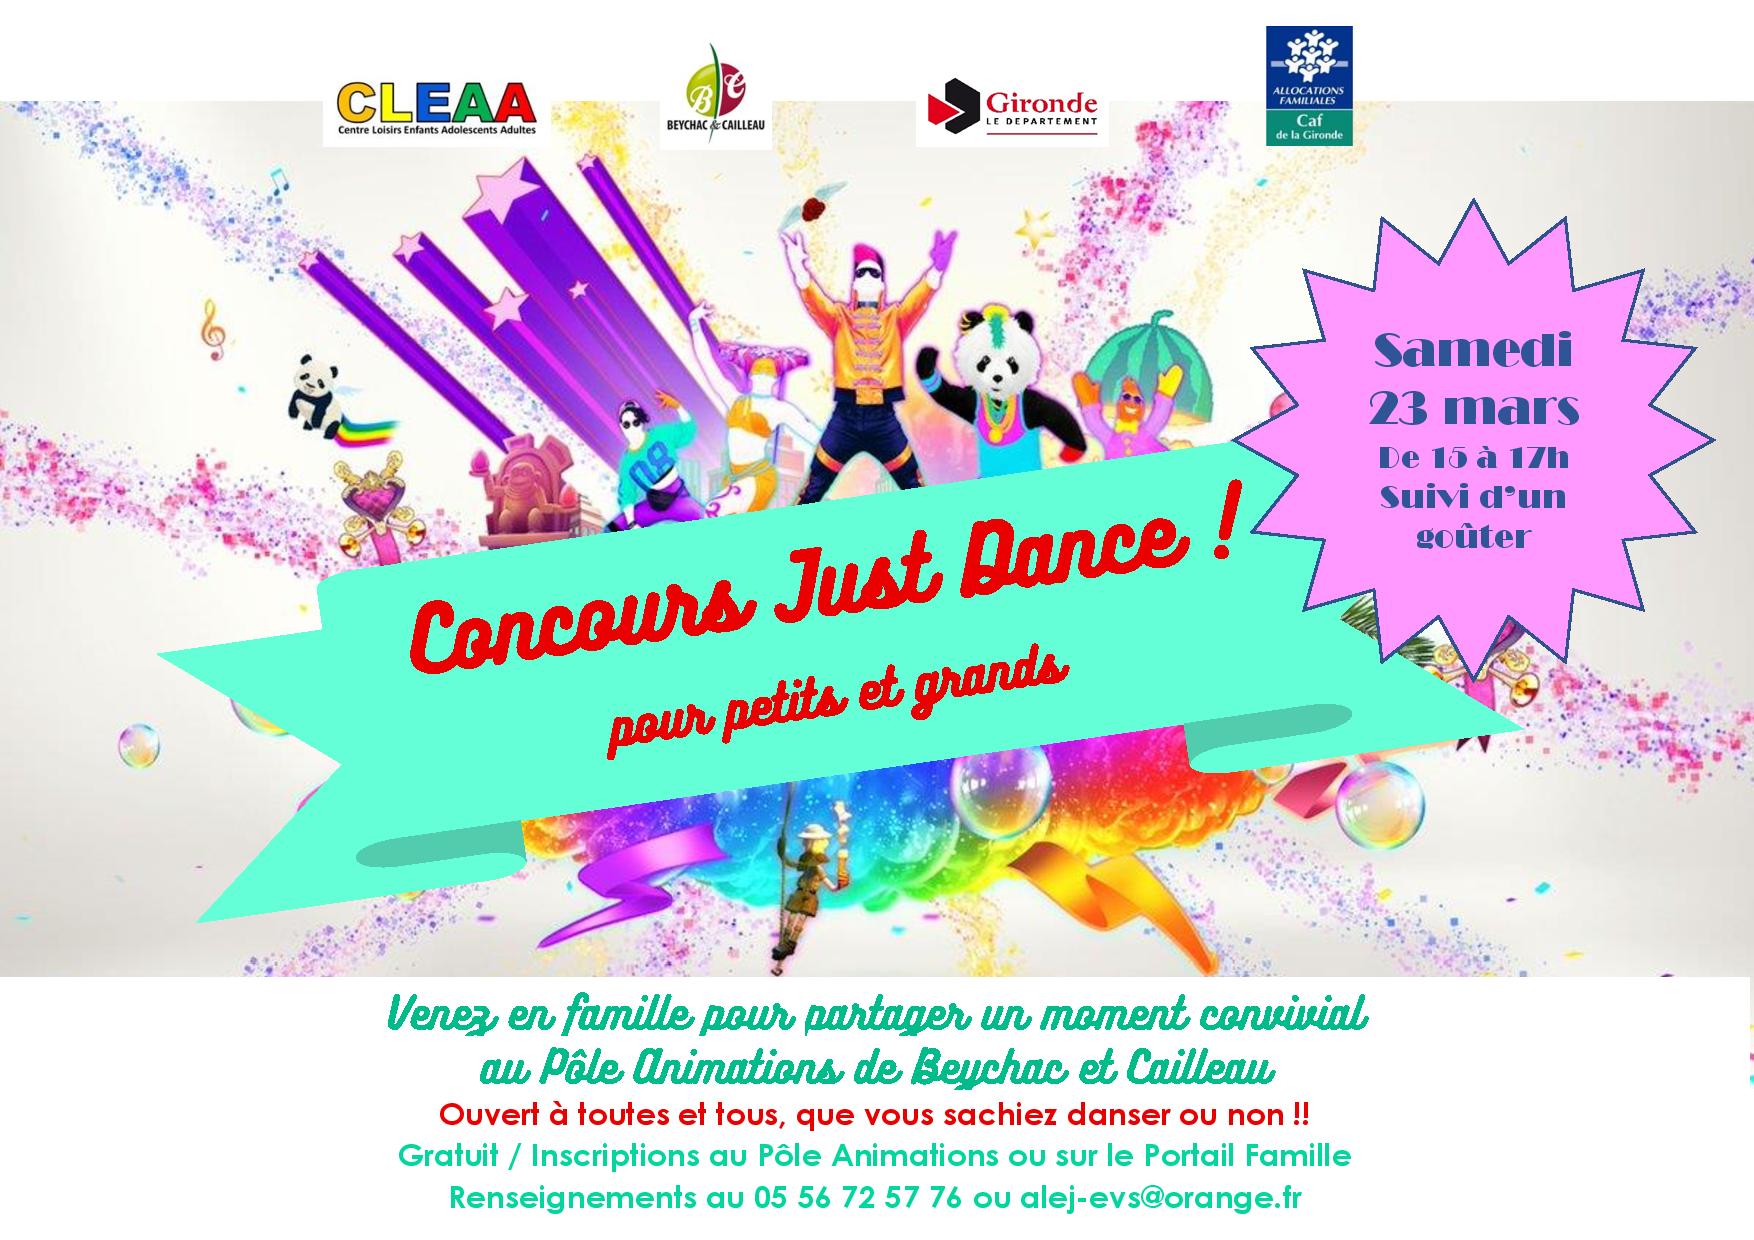 Concours Just dance